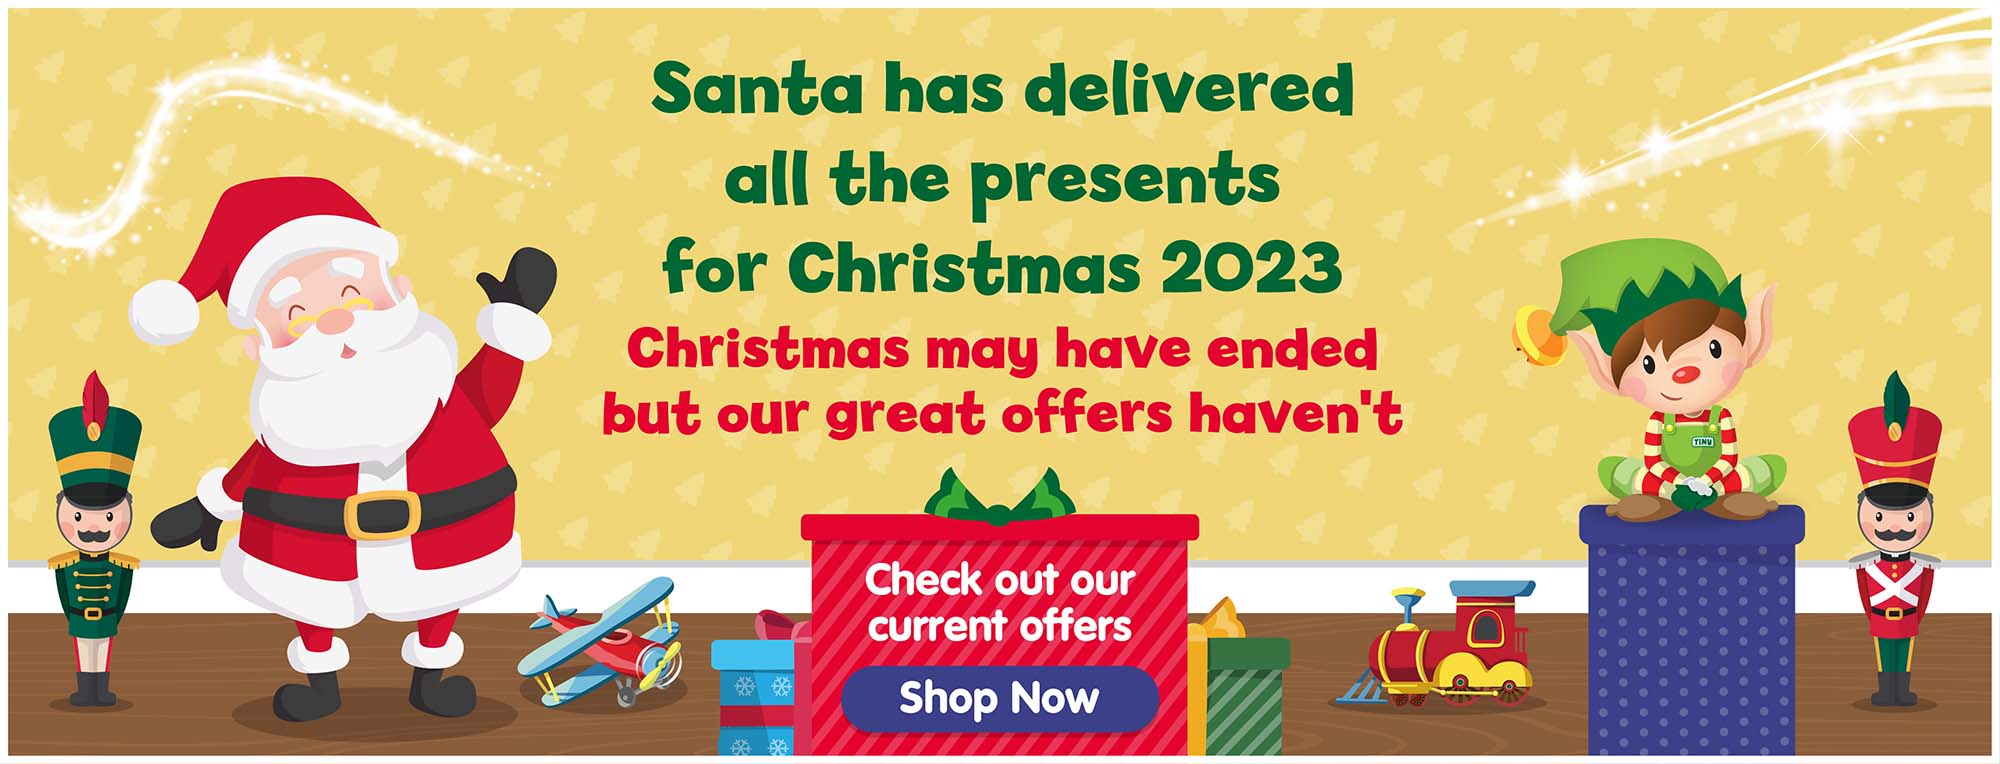 Santa has delivered all the presents for Christmas 2023. Christmas may have ended but our great offers haven't. Check out our current offers.  Shop now